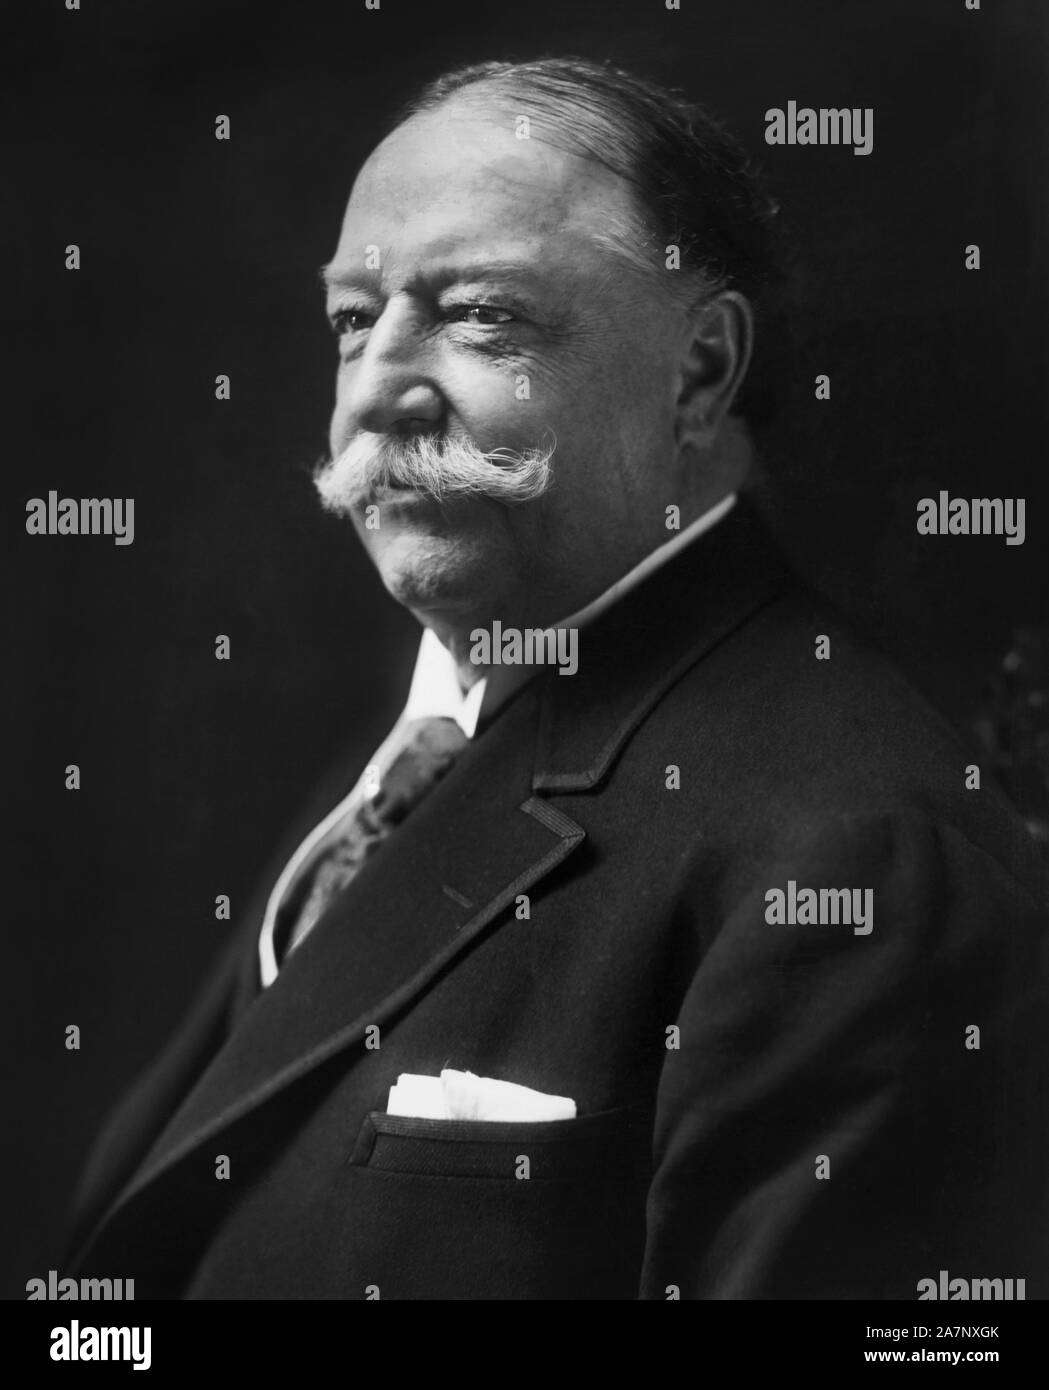 William Howard Taft (1857-1930), 27th President of the United States ...